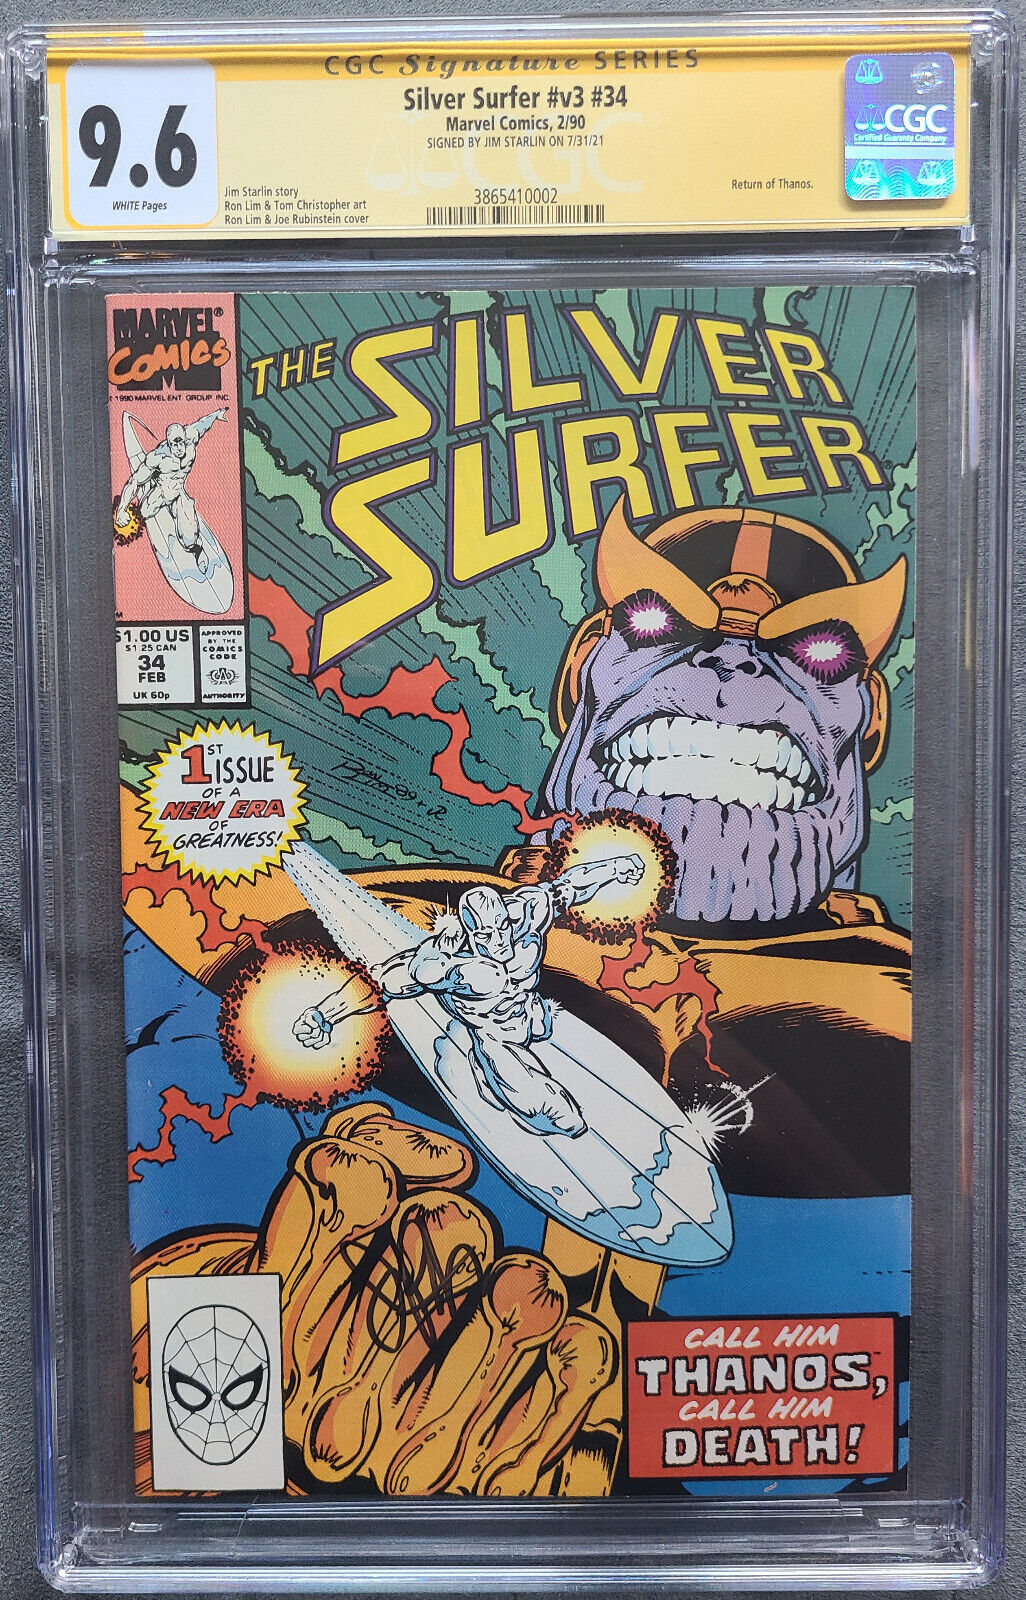 Silver Surfer #34 CGC 9.6 signed by Jim Starlin